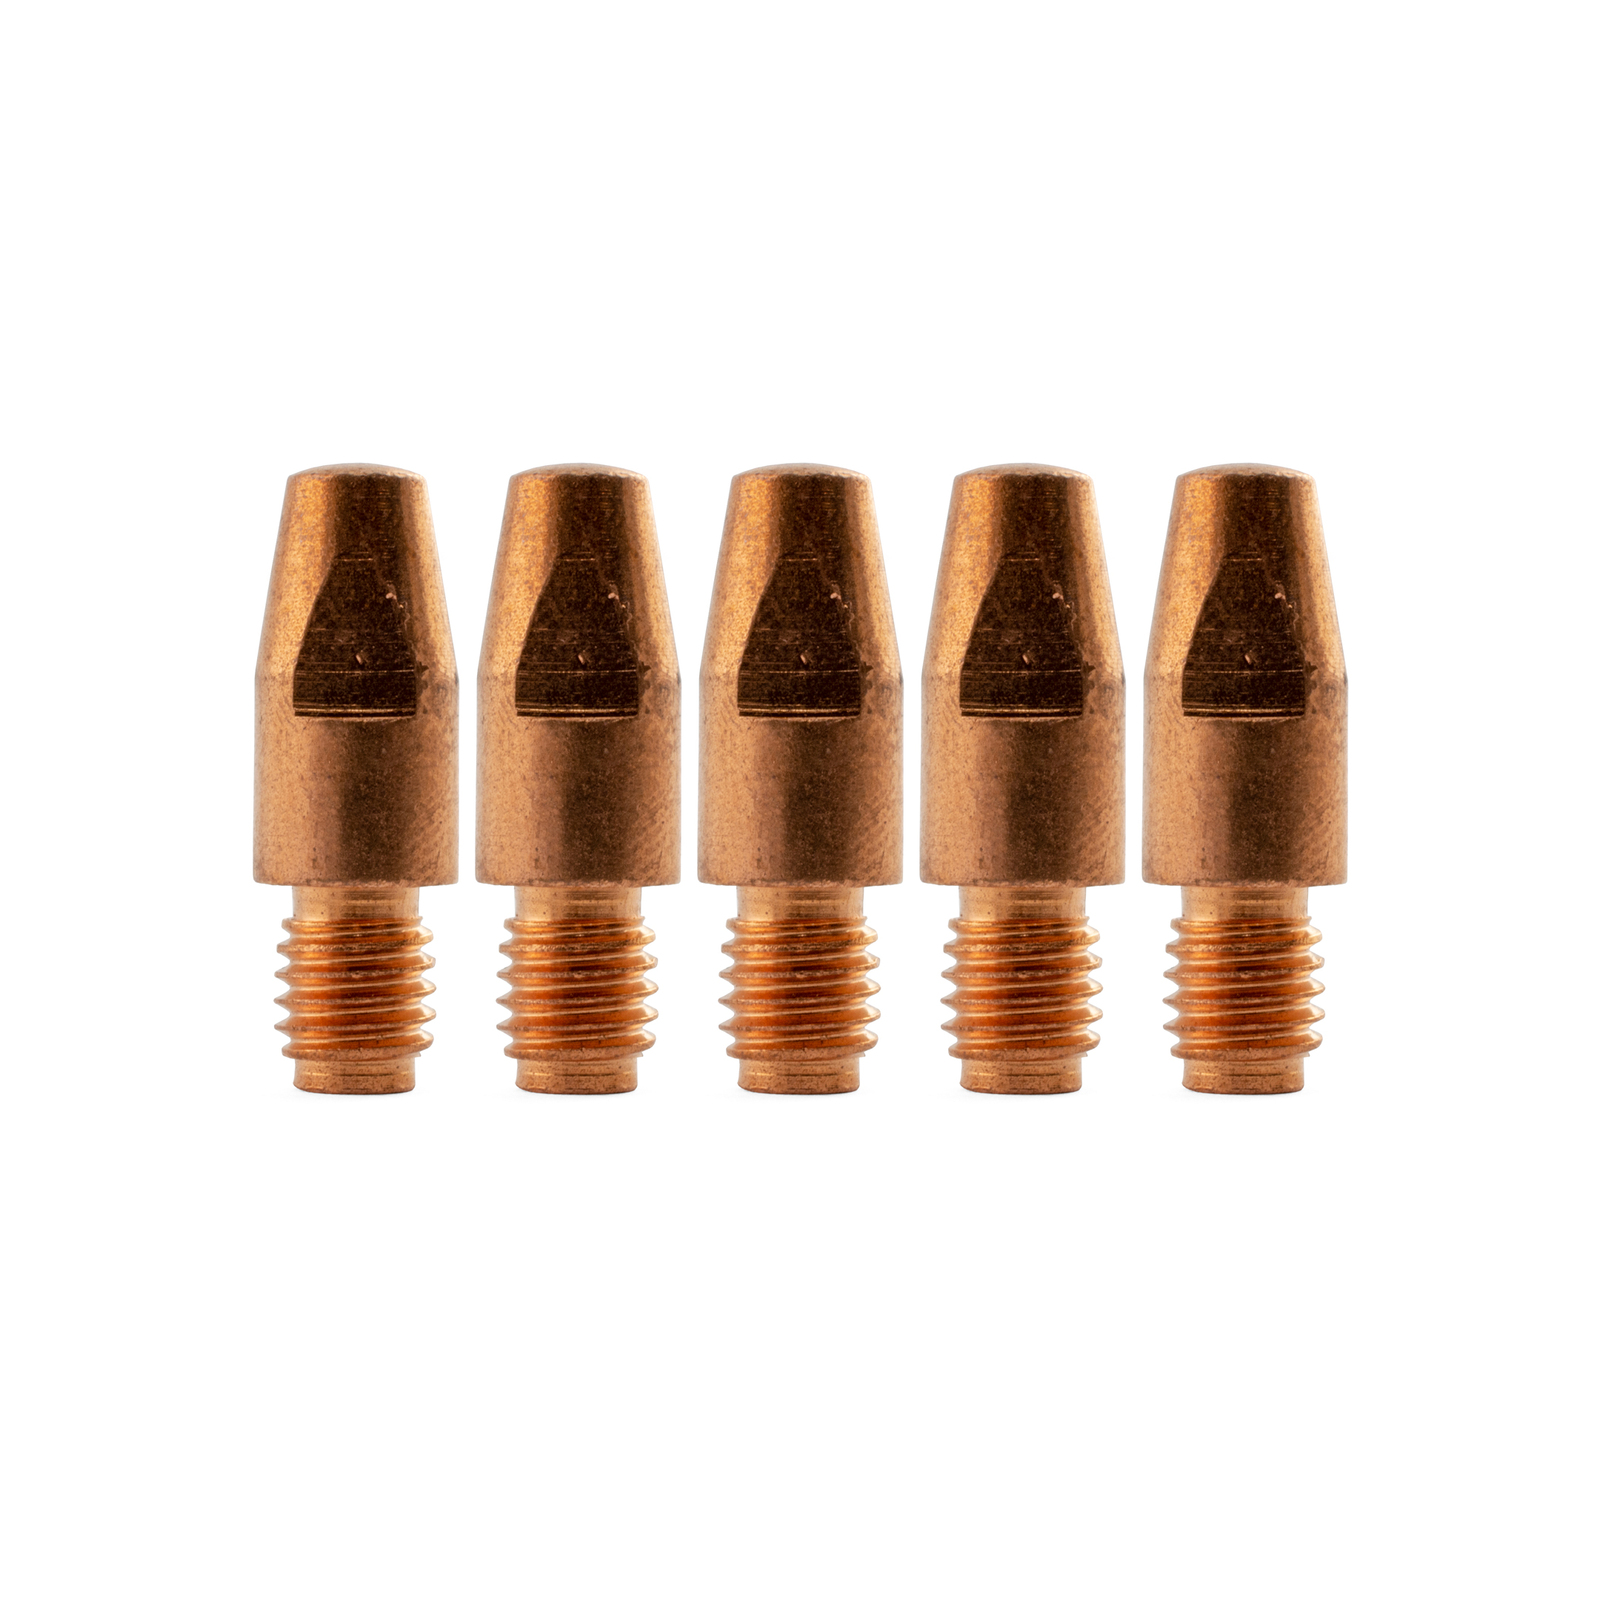 Binzel Style MIG Contact Tips for ALUMINIUM 0.9mm - 5 pack - M8 x 10mm x 0.9mm